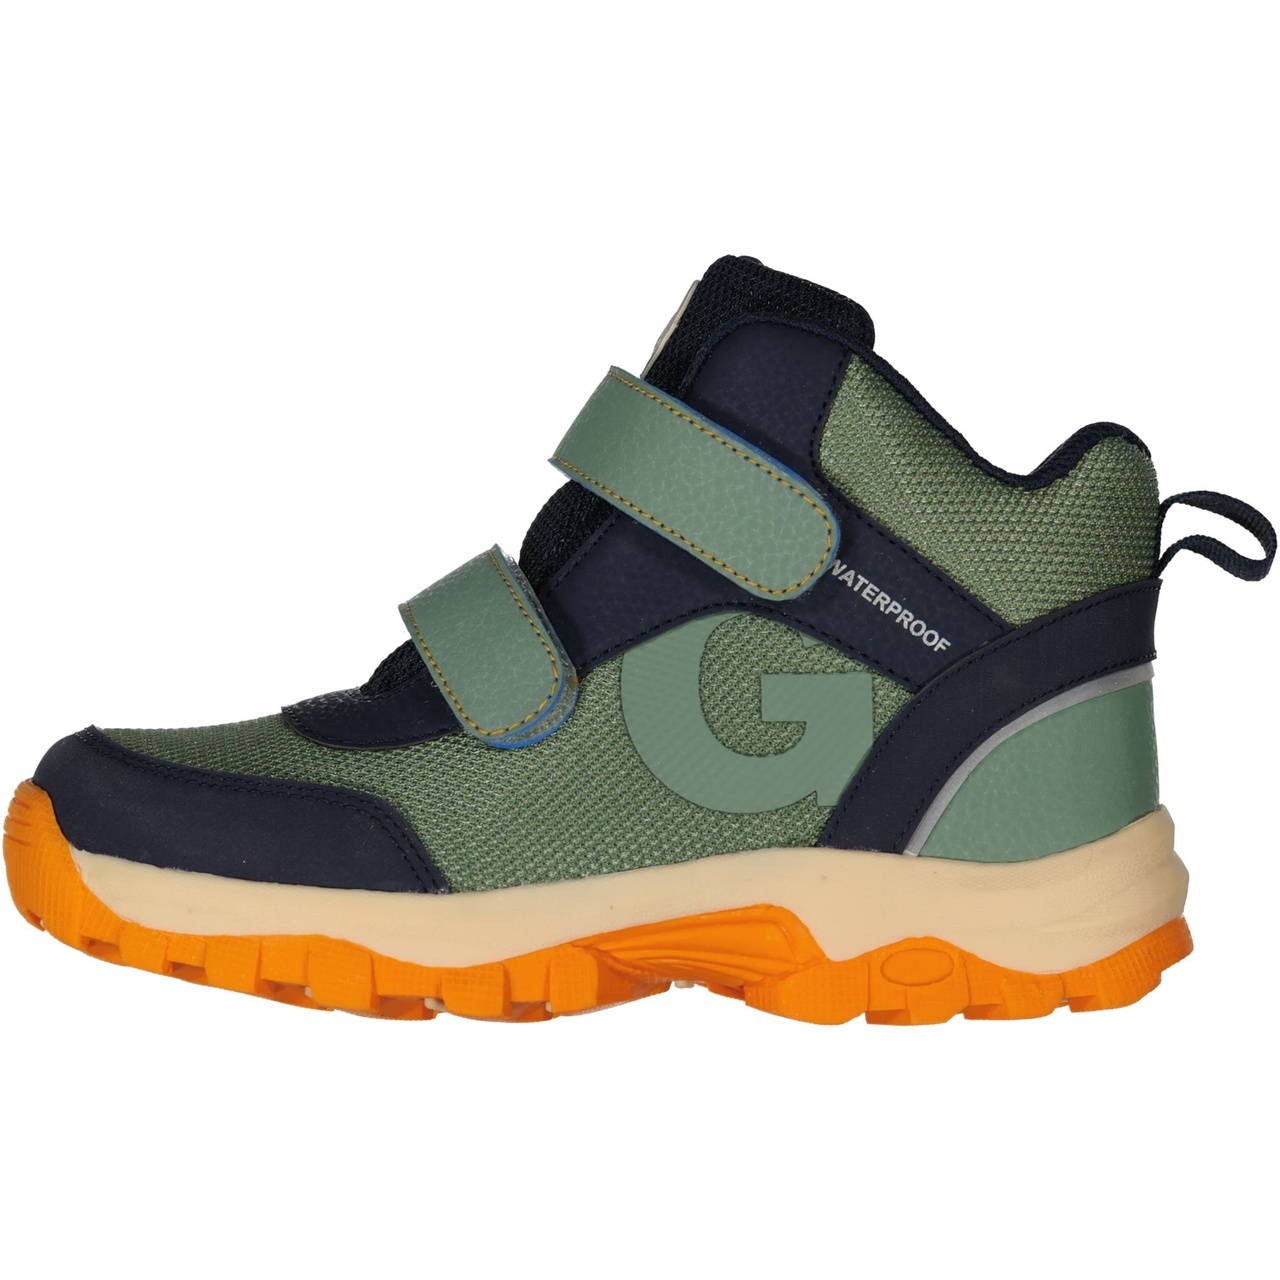 All weather shoes Moss green  29 (19,1 cm)